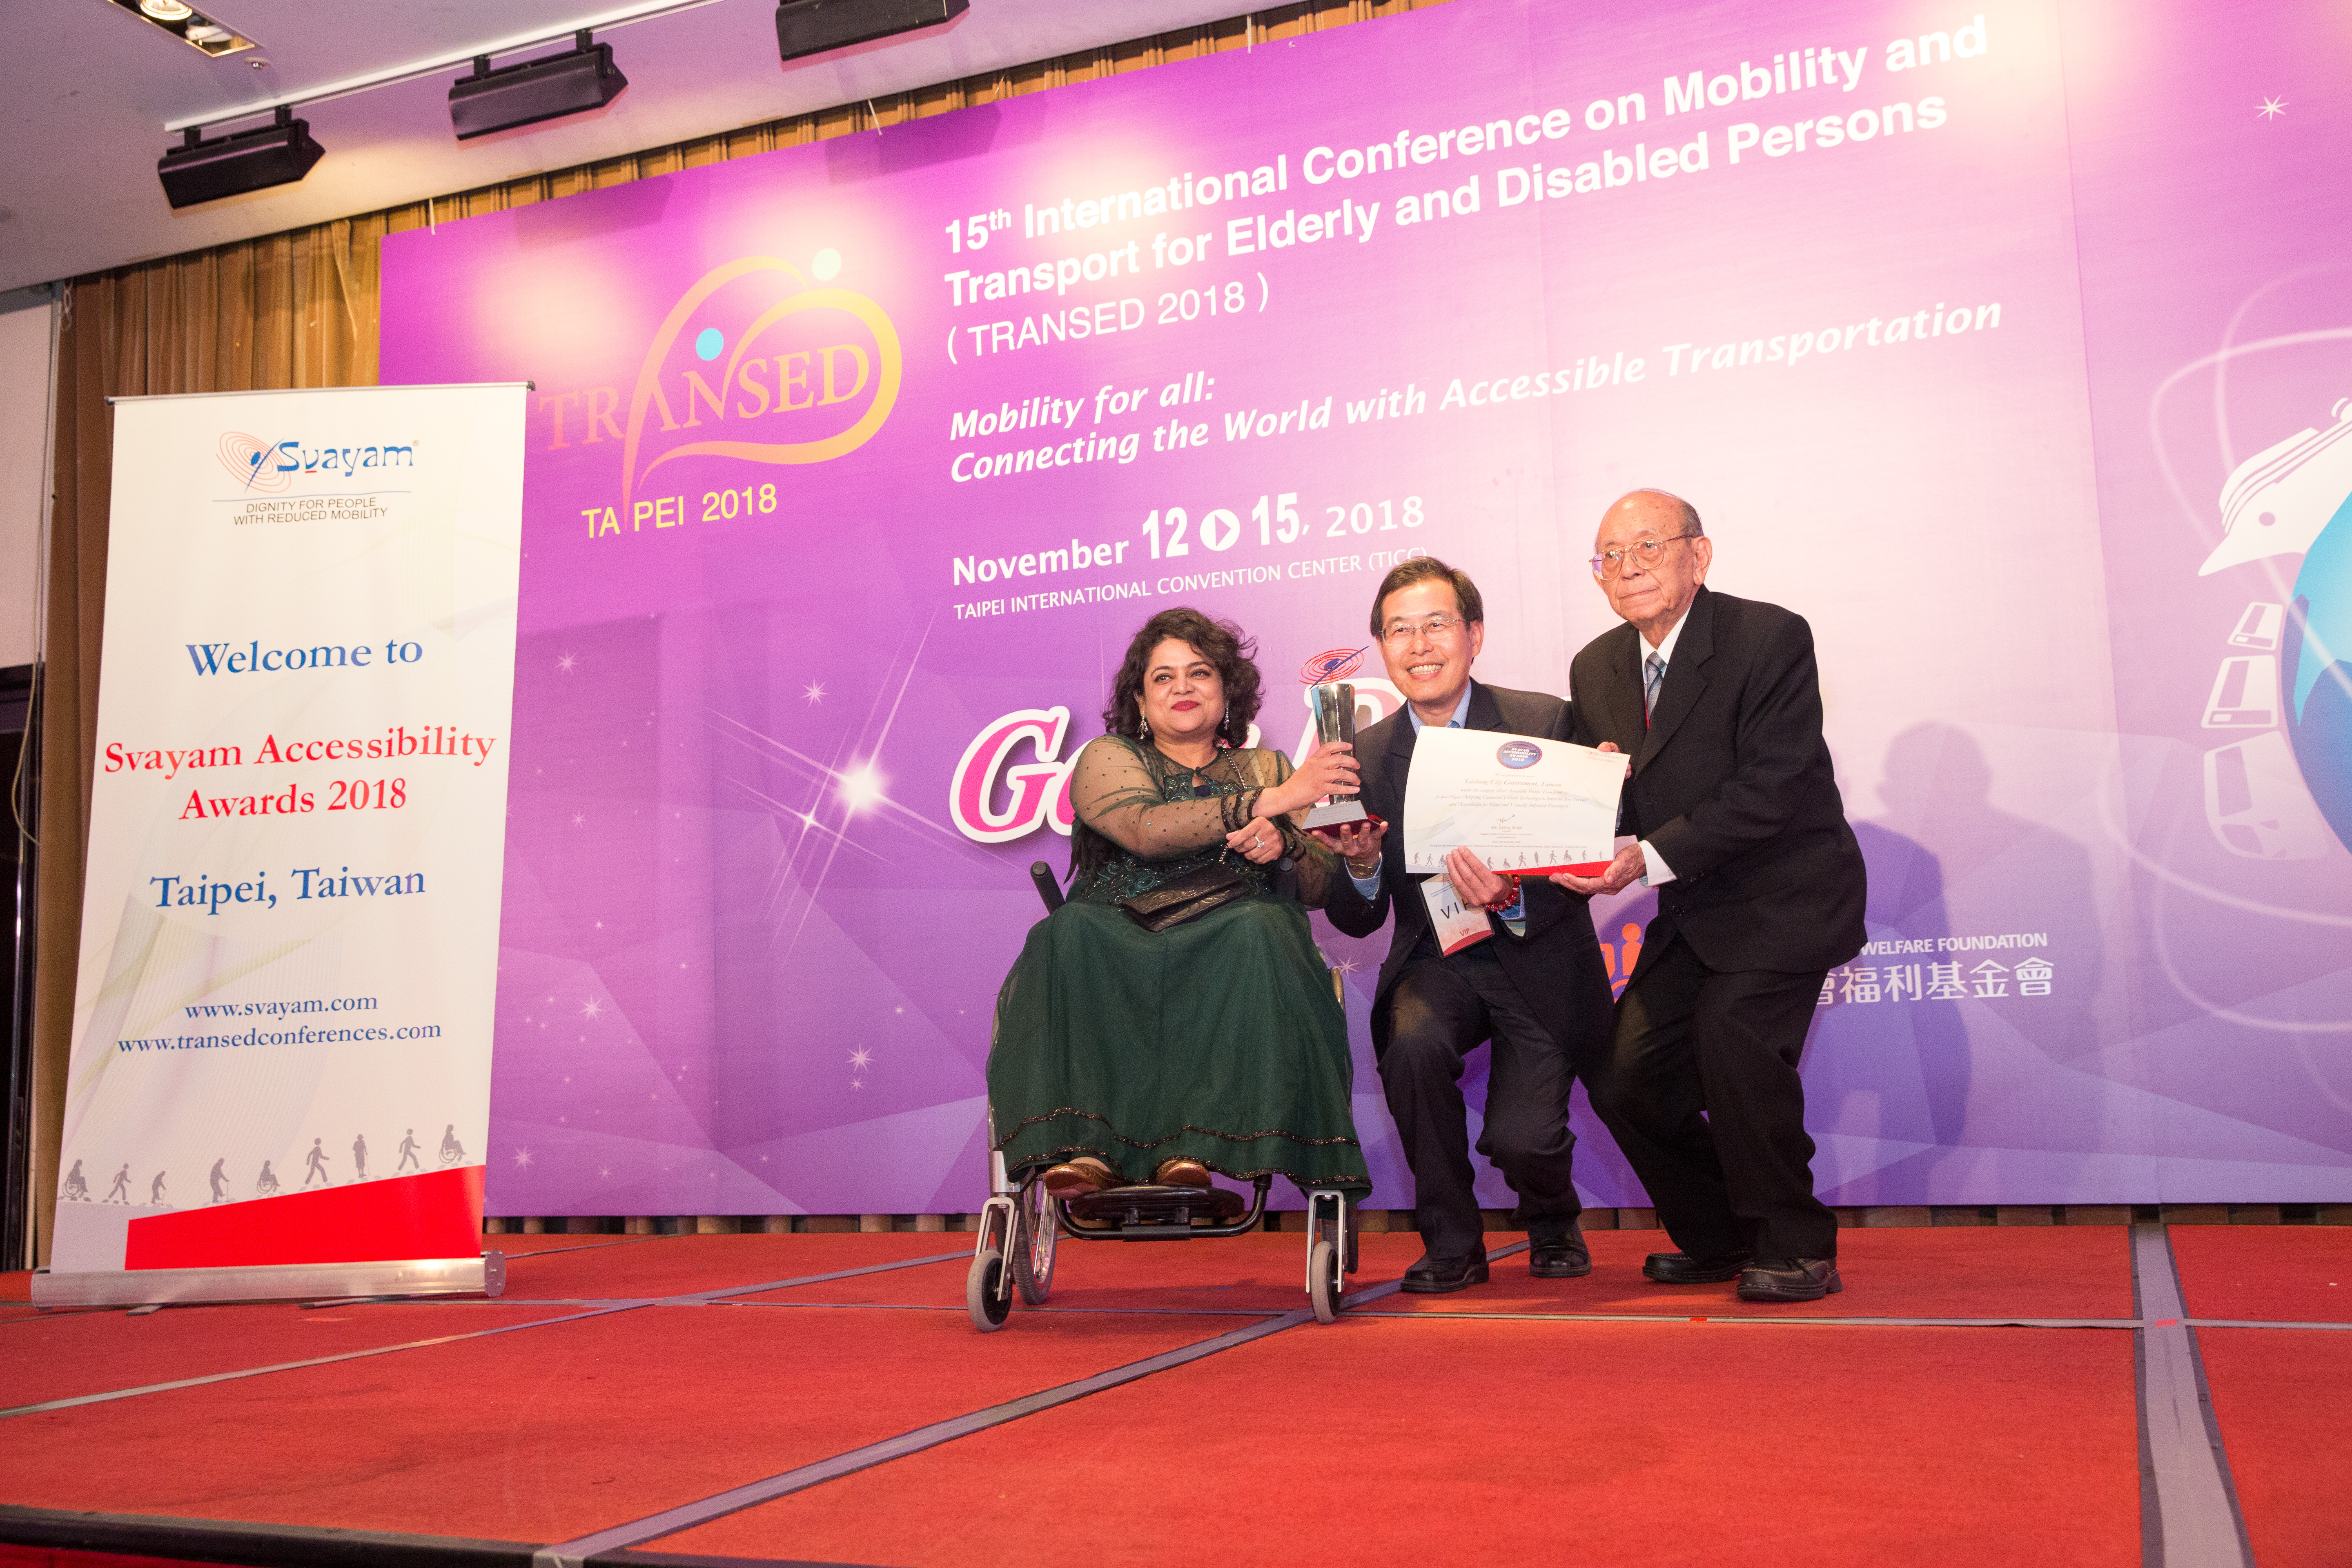 hoto of Mr. Hui-Sheng, Feng, Deputy Director, Transportation Bureau, Taichung City Government, Taiwan, receiving Svayam Accessibility Award 2018 from Svayam Founder Ms. Sminu Jindal & Mr. Patrick Yey, Hony. Chairman, TRANSED2018, at Taipei on 14 Nov 2018 on the sidelines of 15th International Conference on Mobility and Transport for Elderly and Disabled Persons (TRANSED2018)